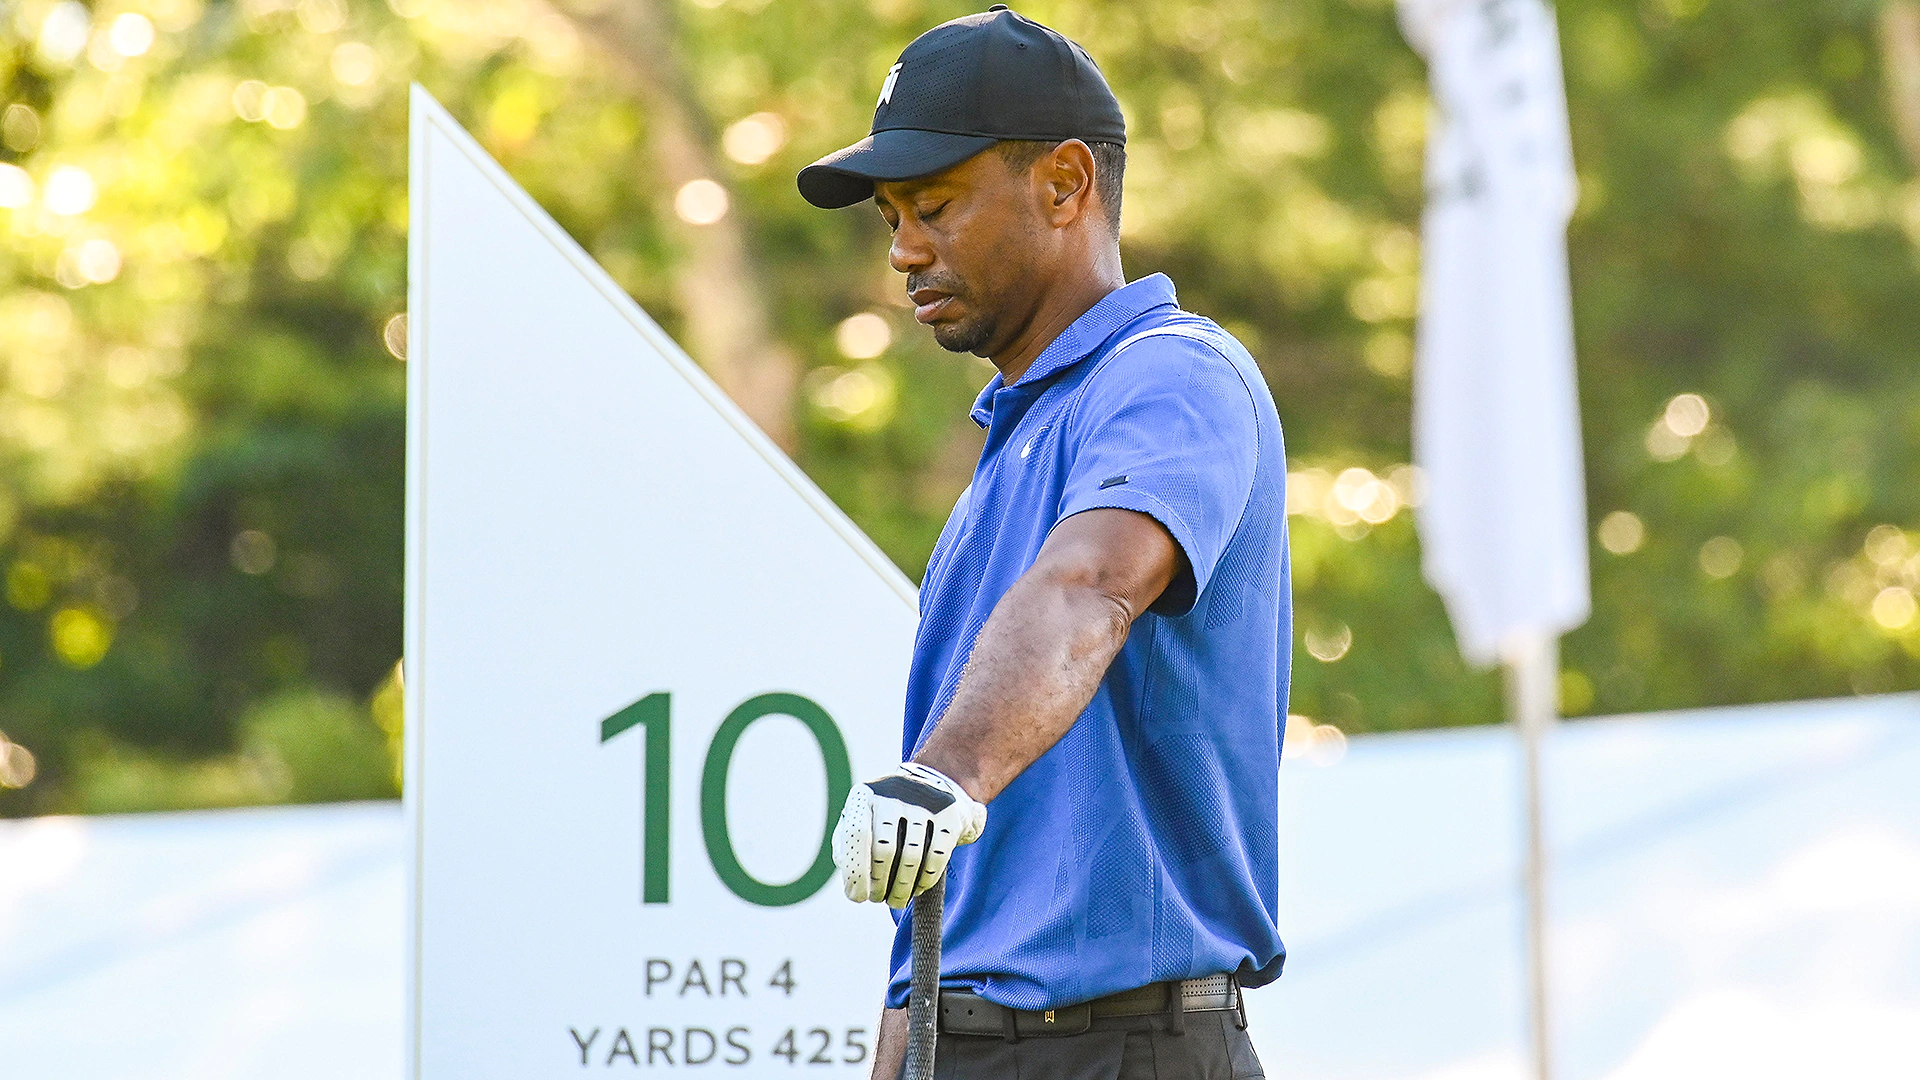 Not to worry, Tiger Woods’ neck is OK, just ‘hot’